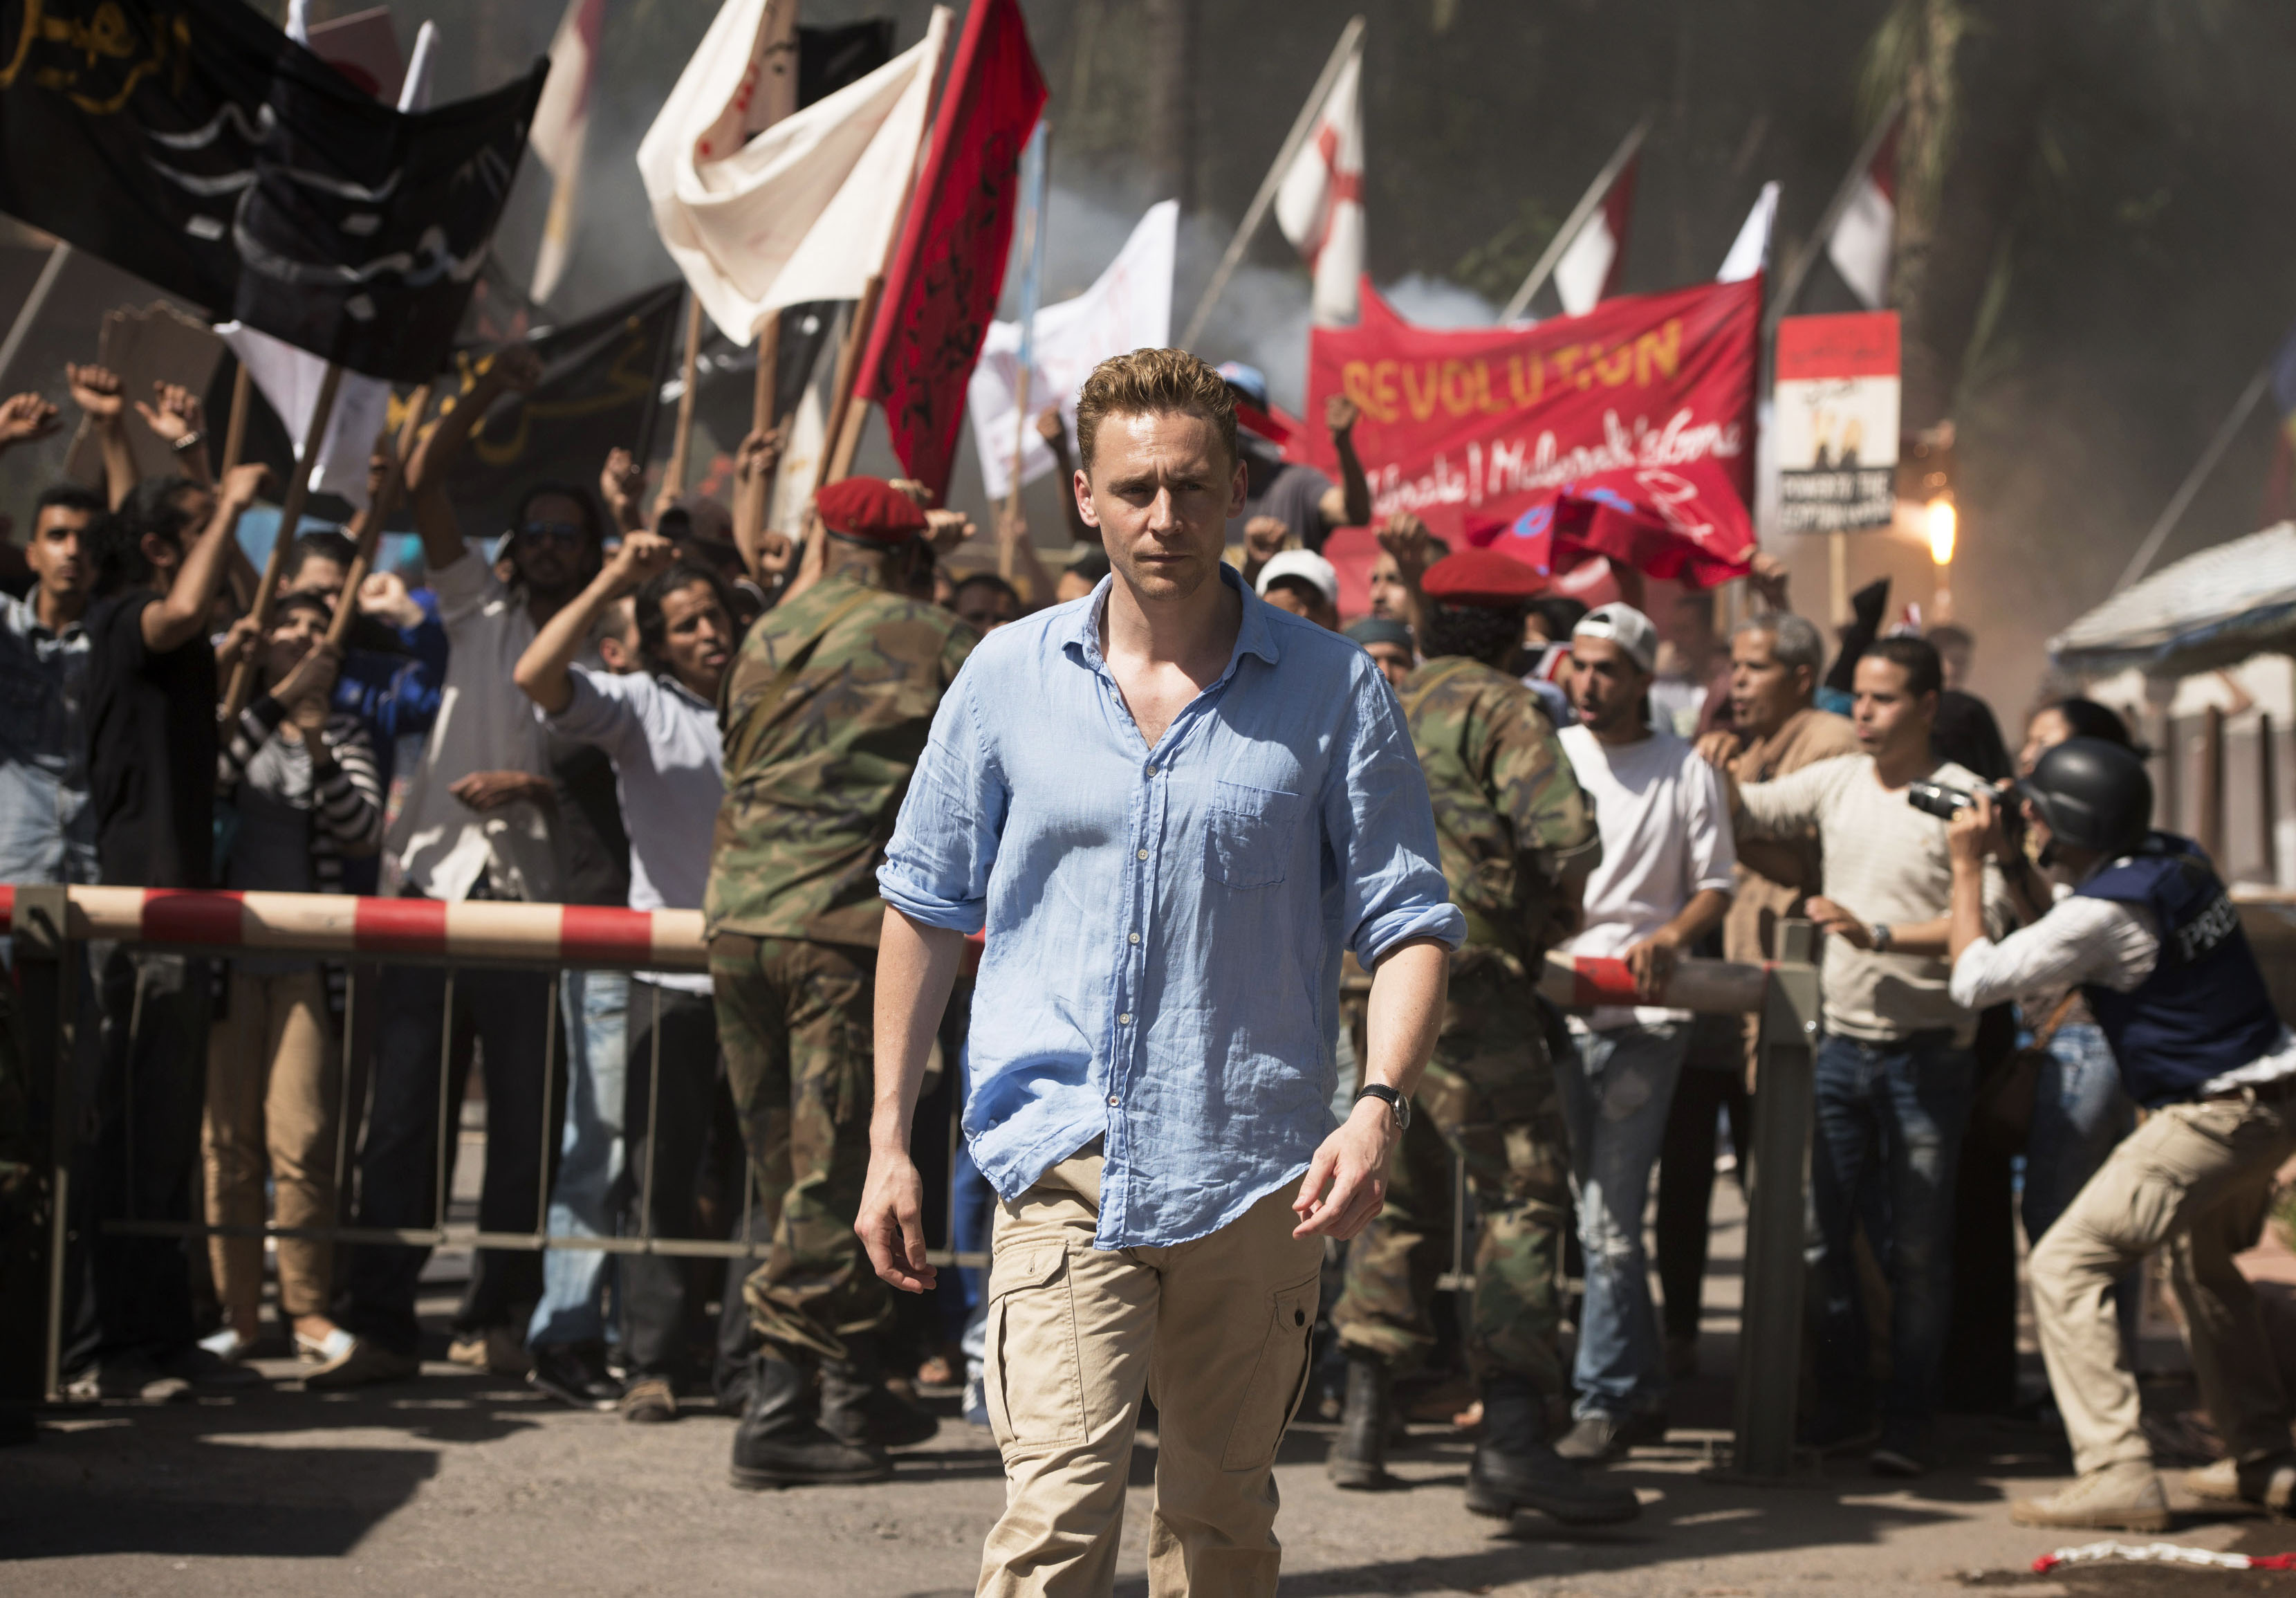 Danish-Jewish director of The Night Manager tipped for Bond | Jewish News